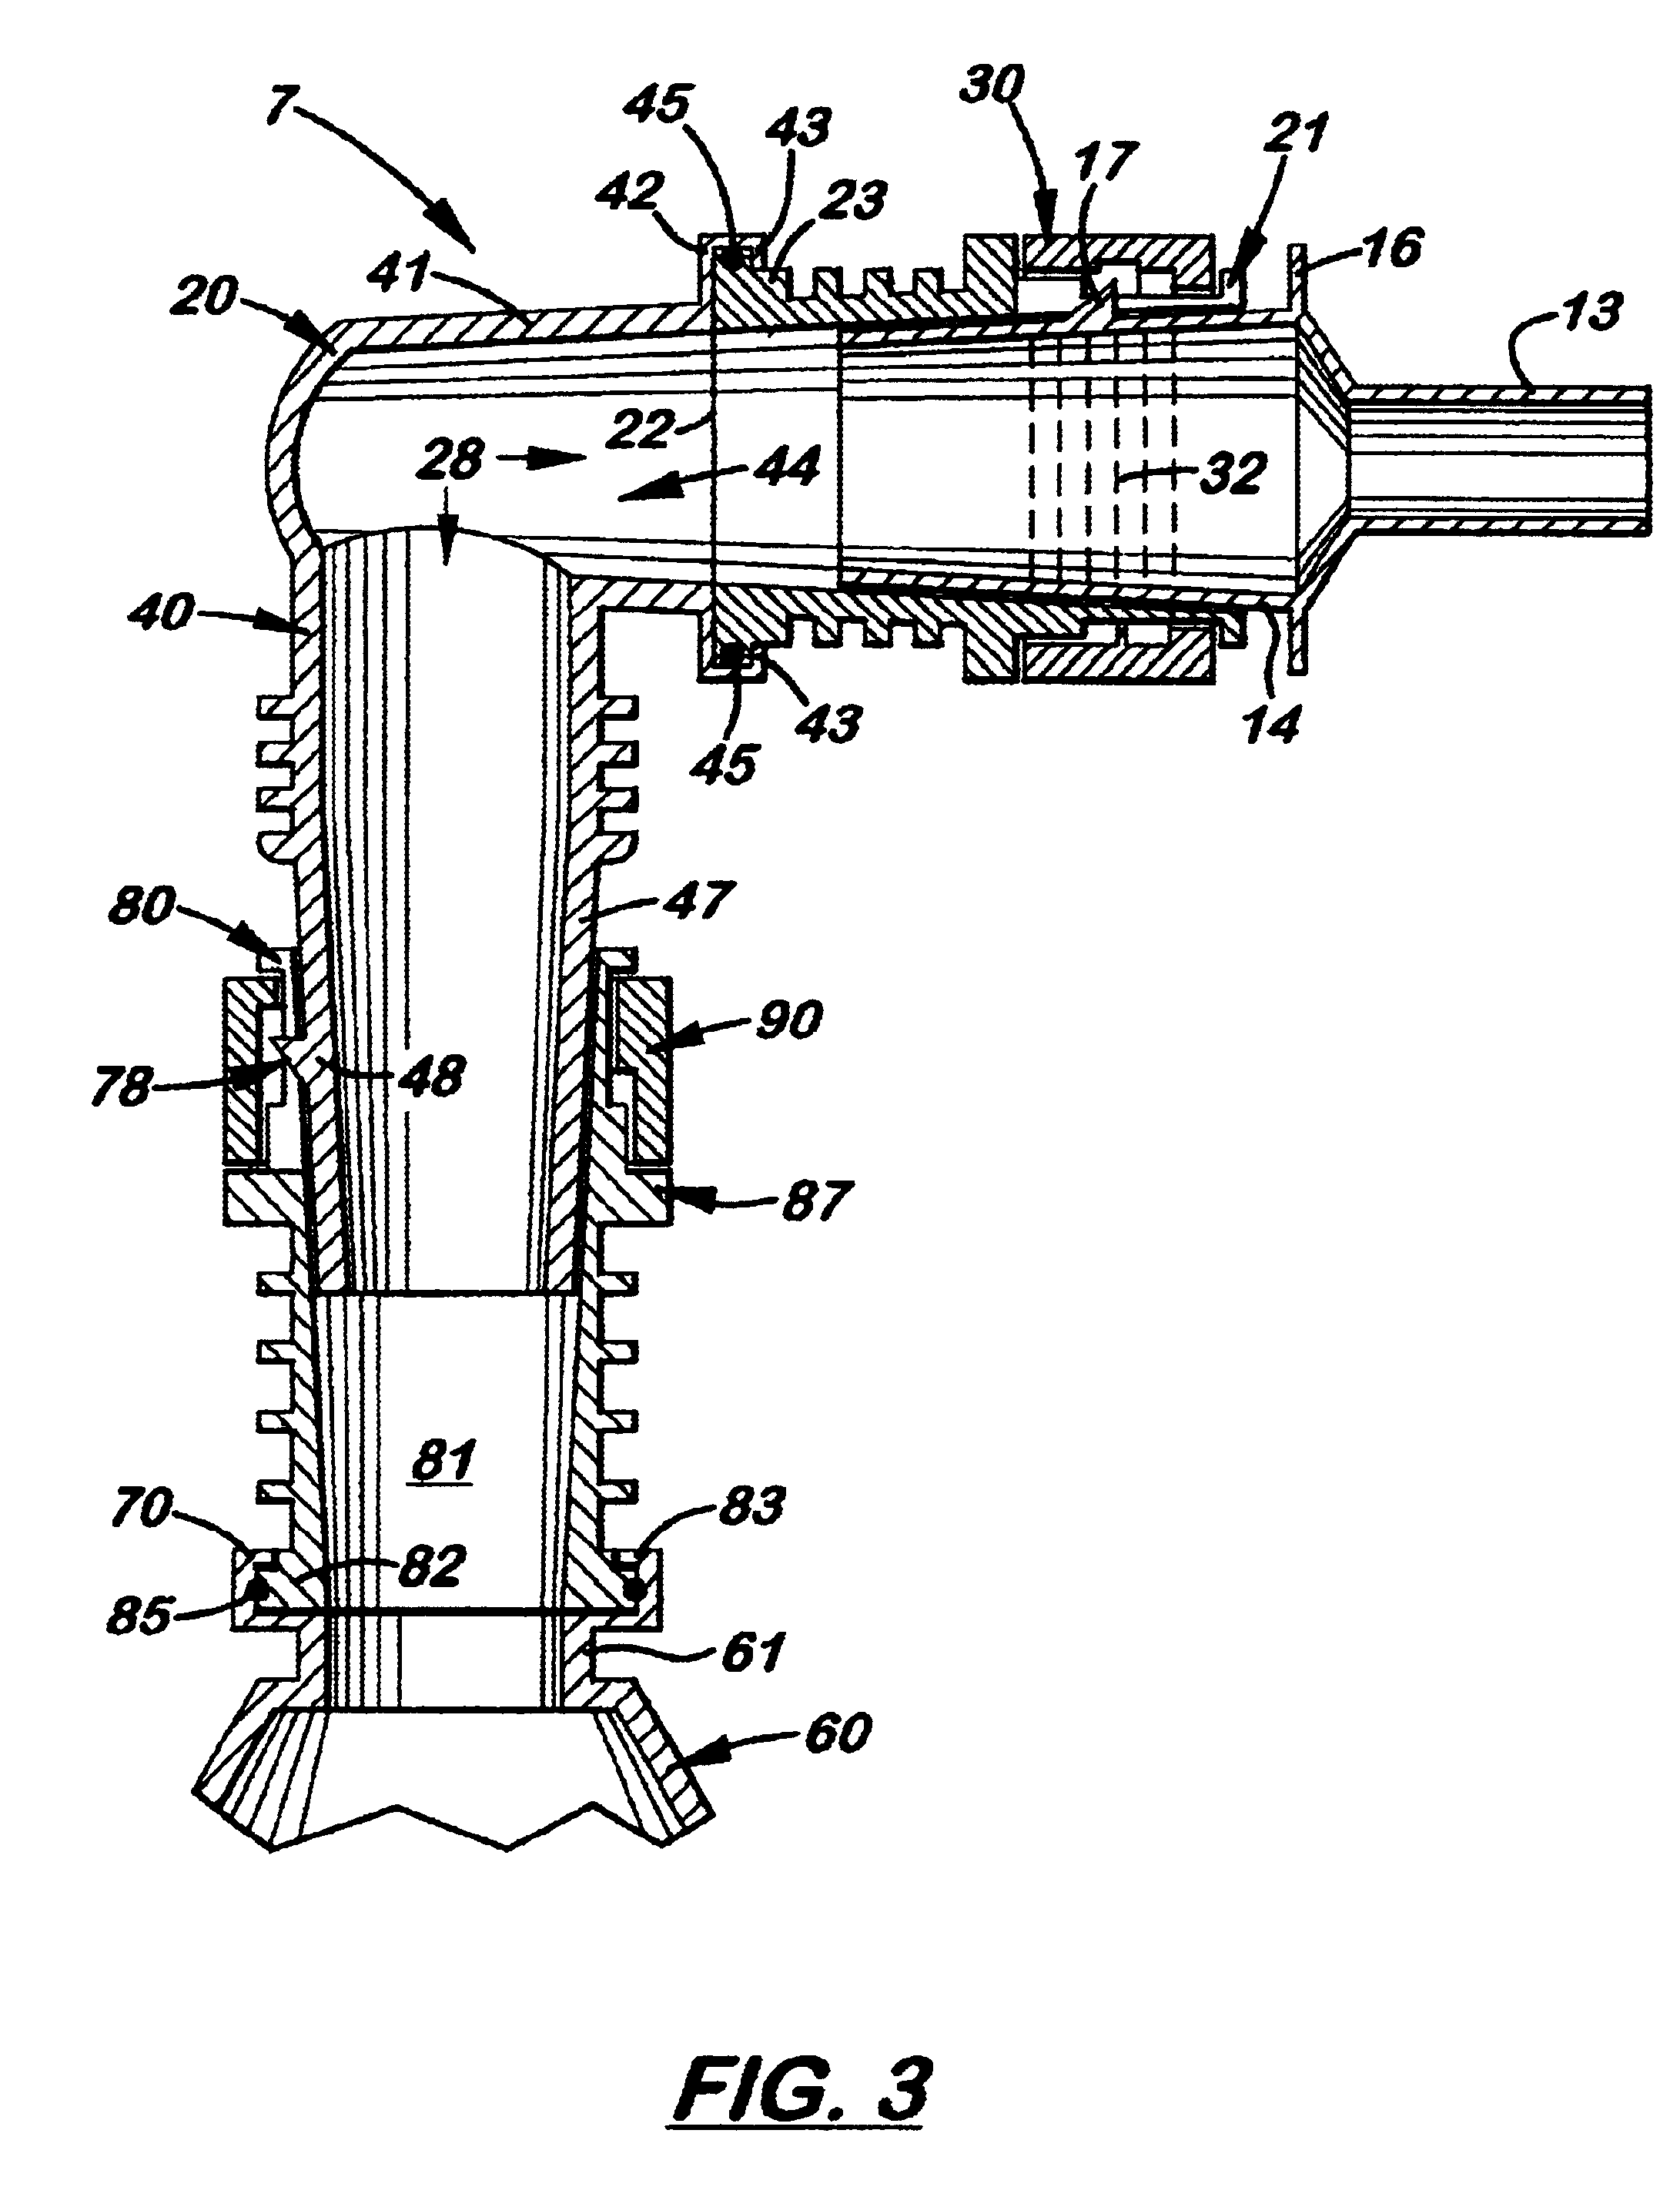 Ventilation tube connection system